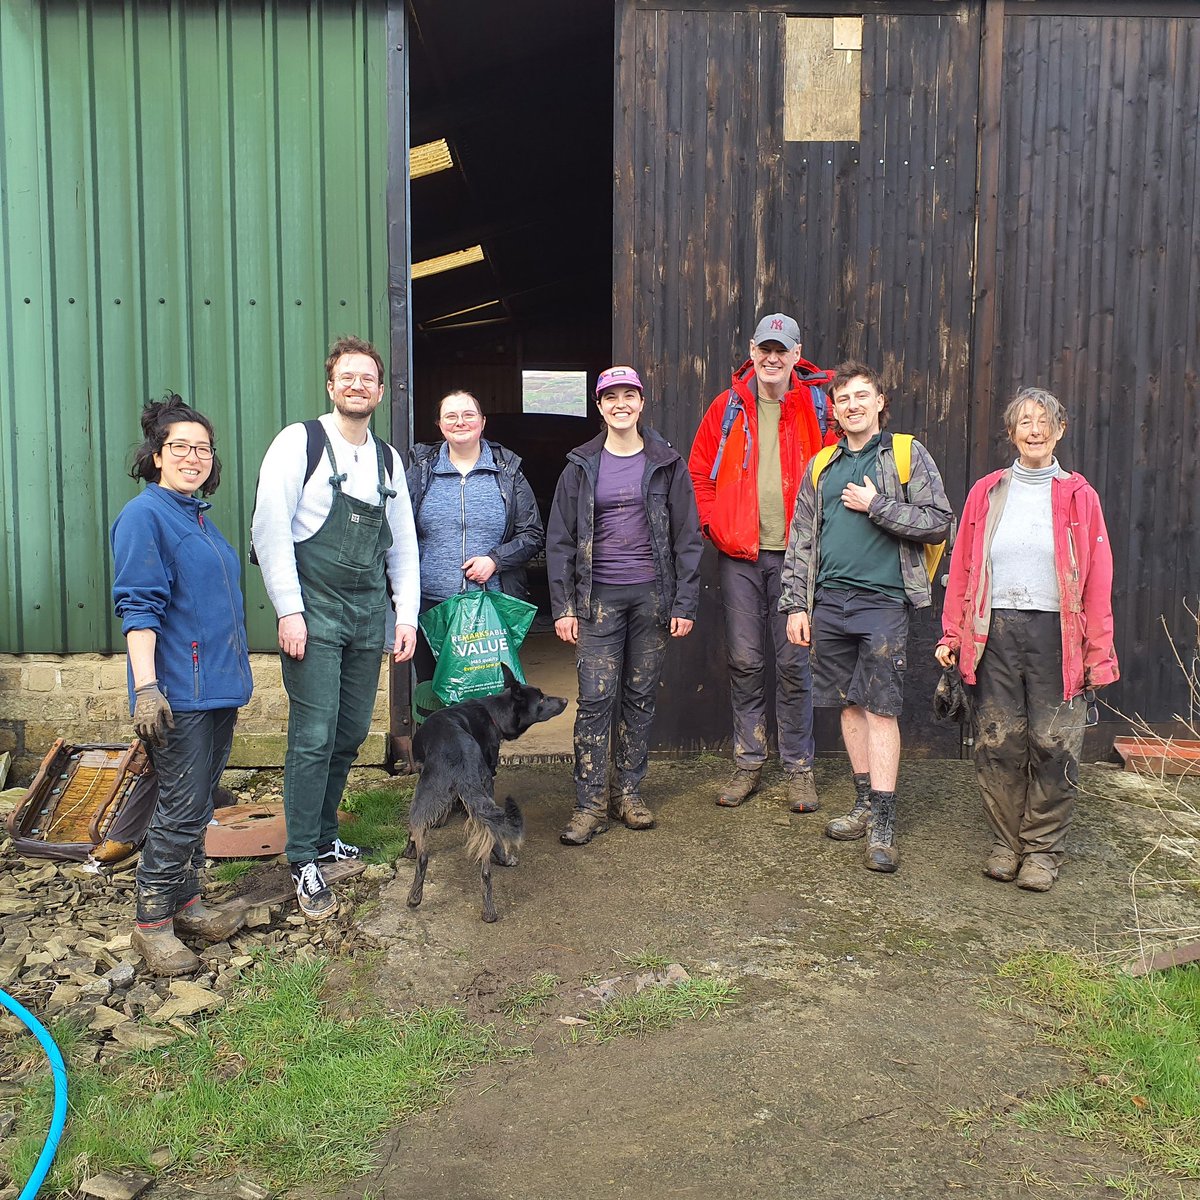 Fantastic volunteers from West Yorkshire Combined Authority LGBTQIA+ network at our tree nursery yesterday. Replanting birch saplings that were too small to go out on planting schemes. Weeding, raking and pushing wheelbarrows of compost with sunshine, showers and glorious rainbow